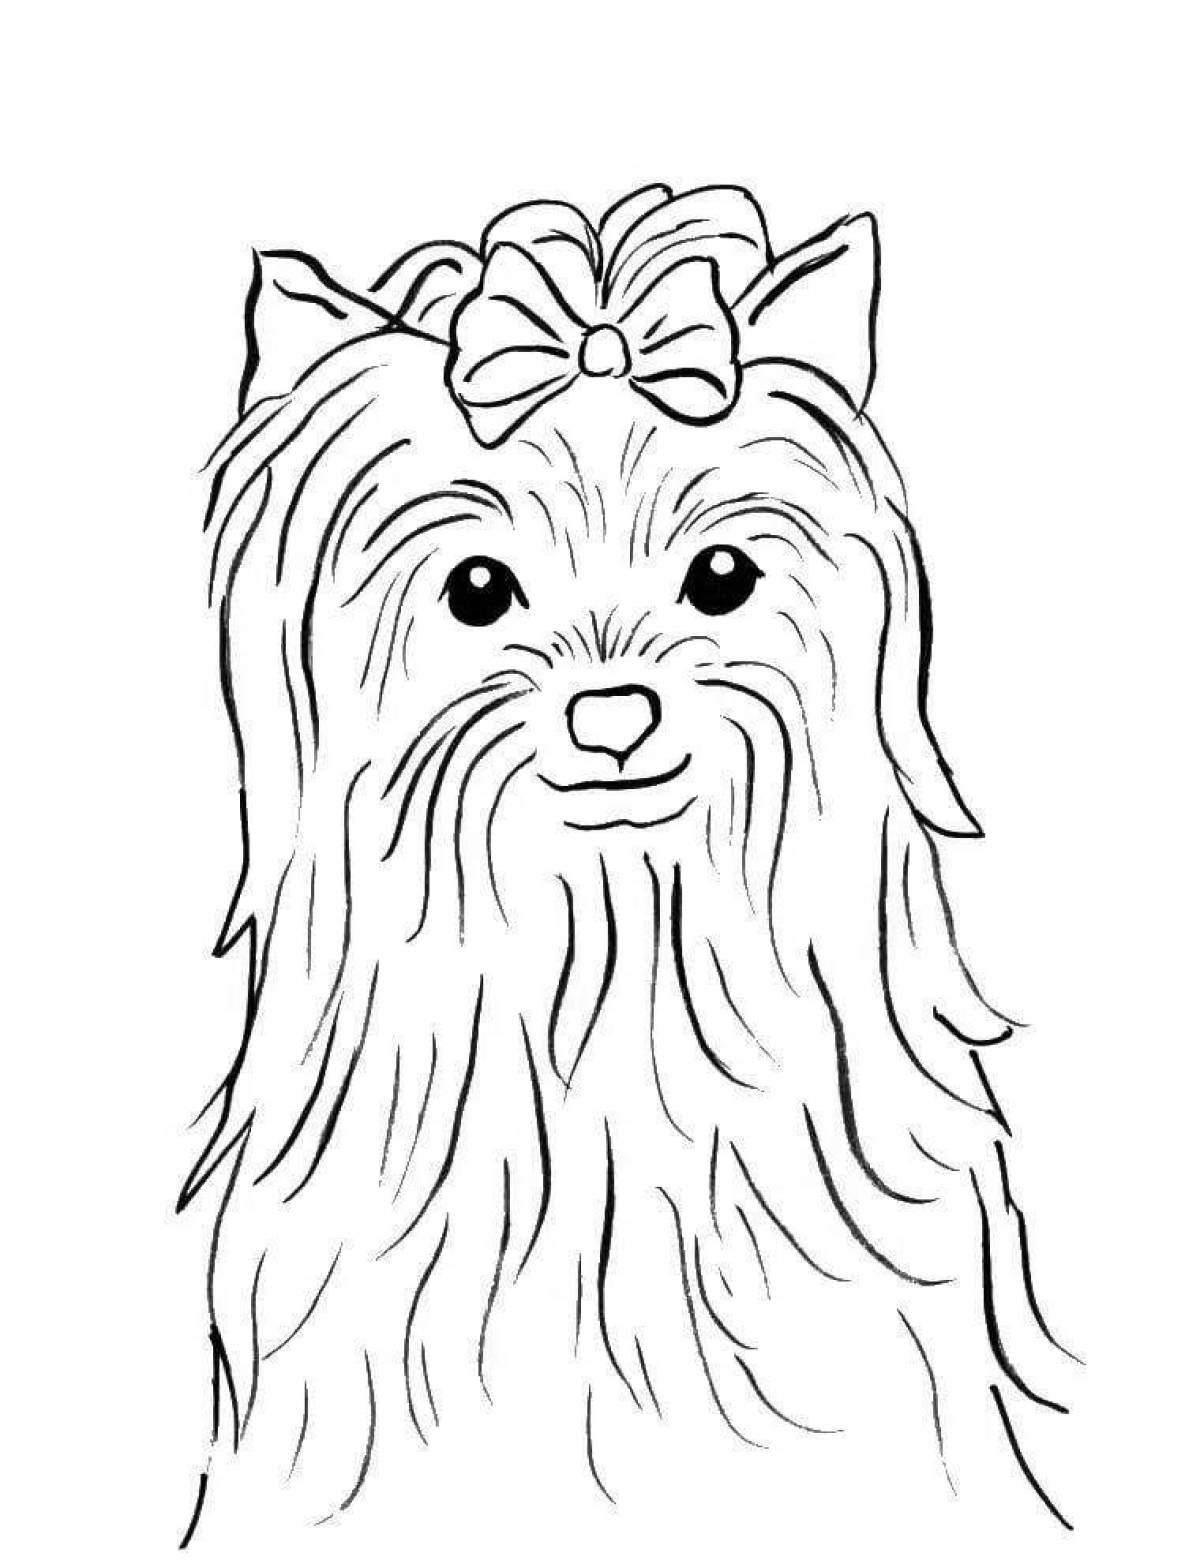 Colouring funny yorkie dog